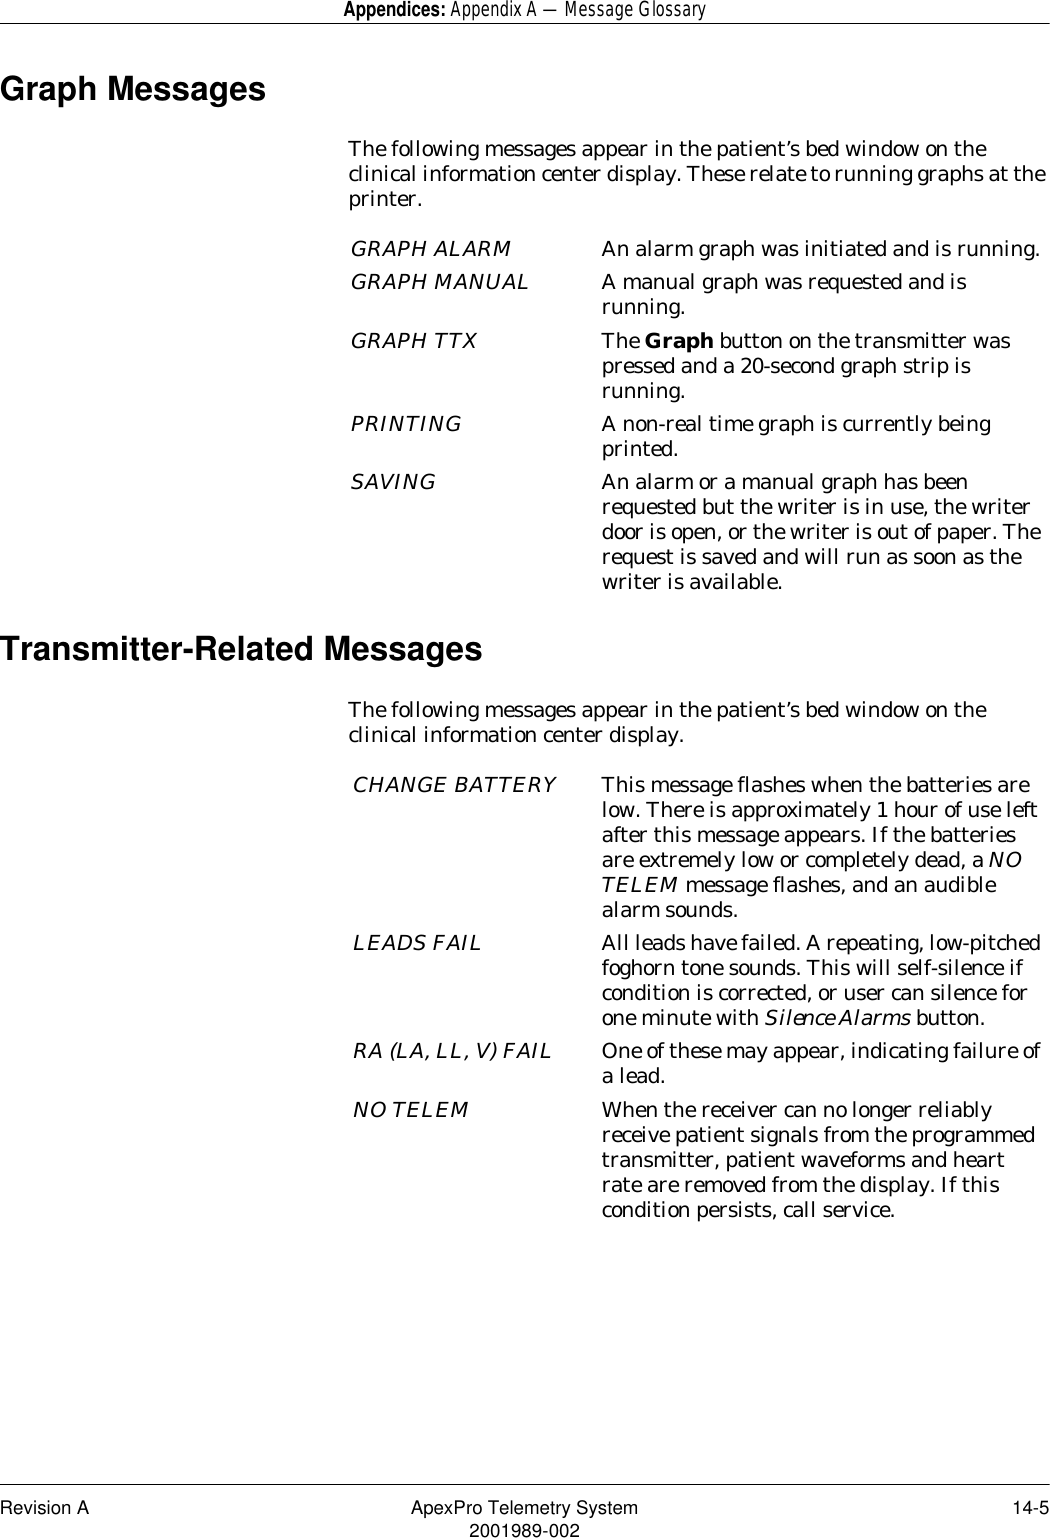 Revision A ApexPro Telemetry System 14-52001989-002Appendices: Appendix A — Message GlossaryGraph MessagesThe following messages appear in the patient’s bed window on the clinical information center display. These relate to running graphs at the printer.Transmitter-Related MessagesThe following messages appear in the patient’s bed window on the clinical information center display.GRAPH ALARM An alarm graph was initiated and is running.GRAPH MANUAL A manual graph was requested and is running.GRAPH TTX The Graph button on the transmitter was pressed and a 20-second graph strip is running.PRINTING A non-real time graph is currently being printed. SAVING An alarm or a manual graph has been requested but the writer is in use, the writer door is open, or the writer is out of paper. The request is saved and will run as soon as the writer is available.CHANGE BATTERY This message flashes when the batteries are low. There is approximately 1 hour of use left after this message appears. If the batteries are extremely low or completely dead, a NO TELEM message flashes, and an audible alarm sounds.LEADS FAIL All leads have failed. A repeating, low-pitched foghorn tone sounds. This will self-silence if condition is corrected, or user can silence for one minute with Silence Alarms button.RA (LA, LL, V) FAIL One of these may appear, indicating failure of a lead.NO TELEM When the receiver can no longer reliably receive patient signals from the programmed transmitter, patient waveforms and heart rate are removed from the display. If this condition persists, call service.